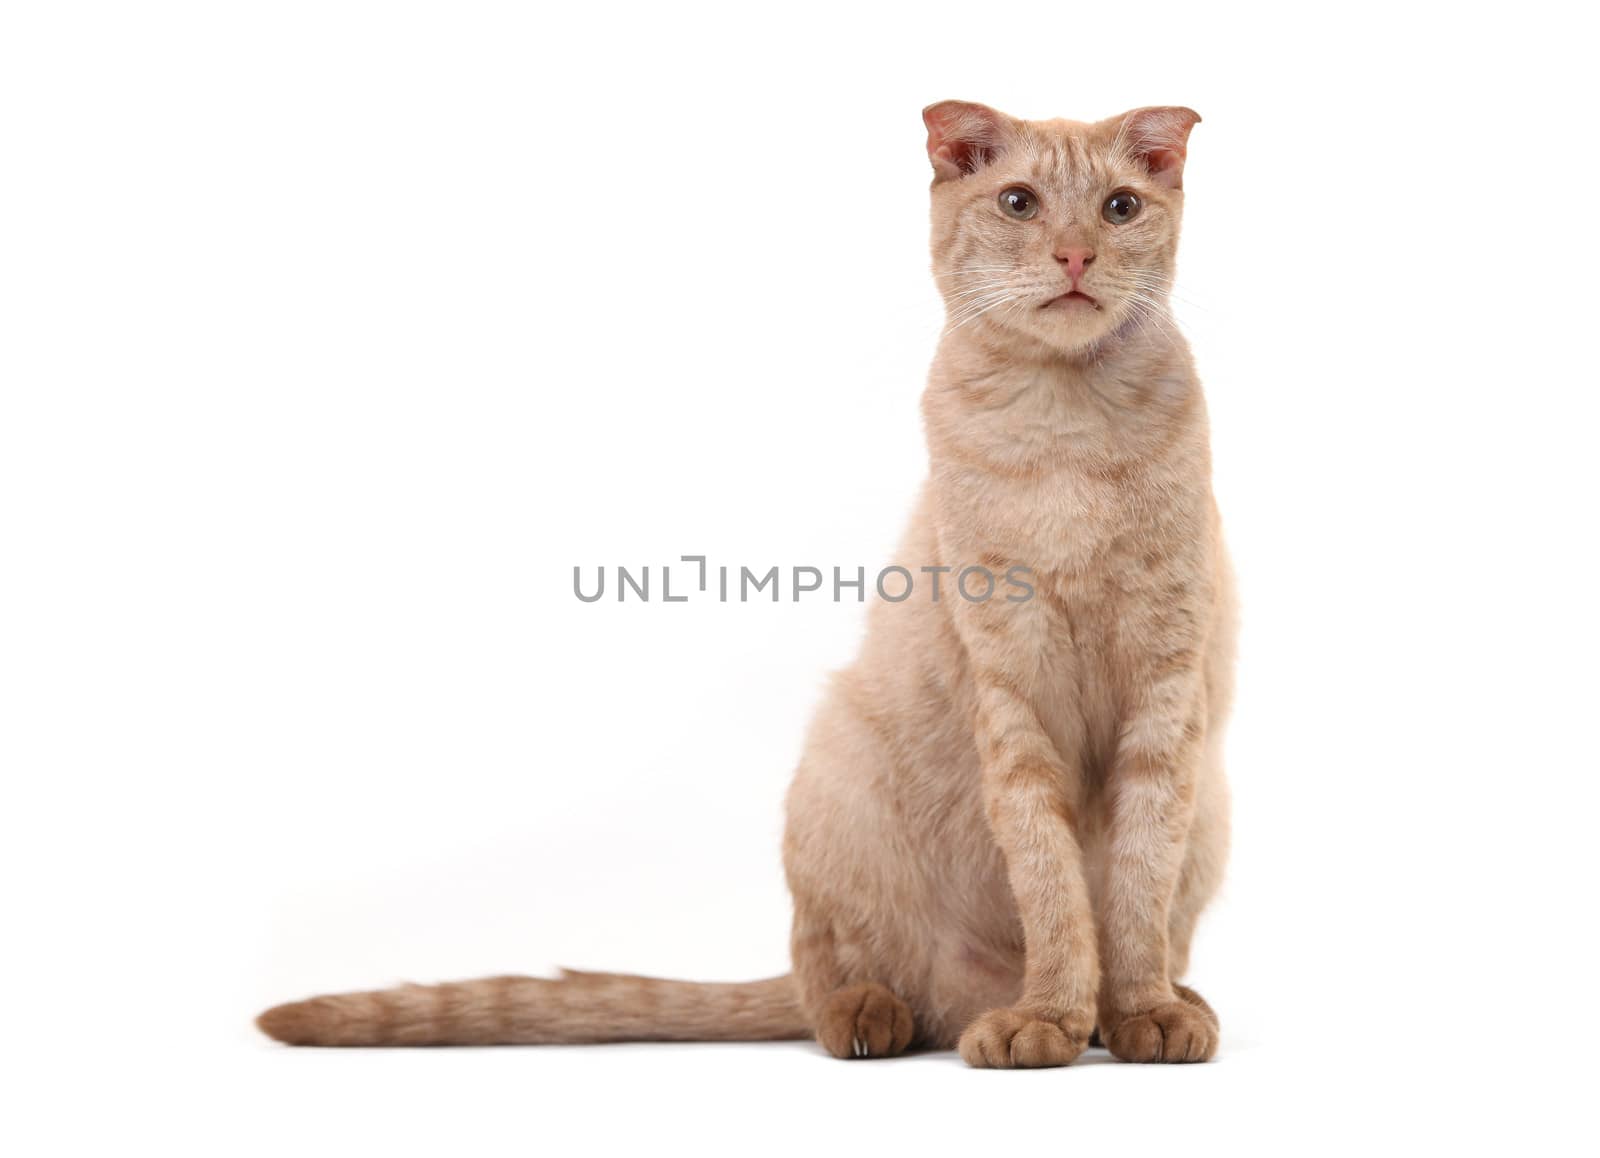 Short-haired cat over white background in studio